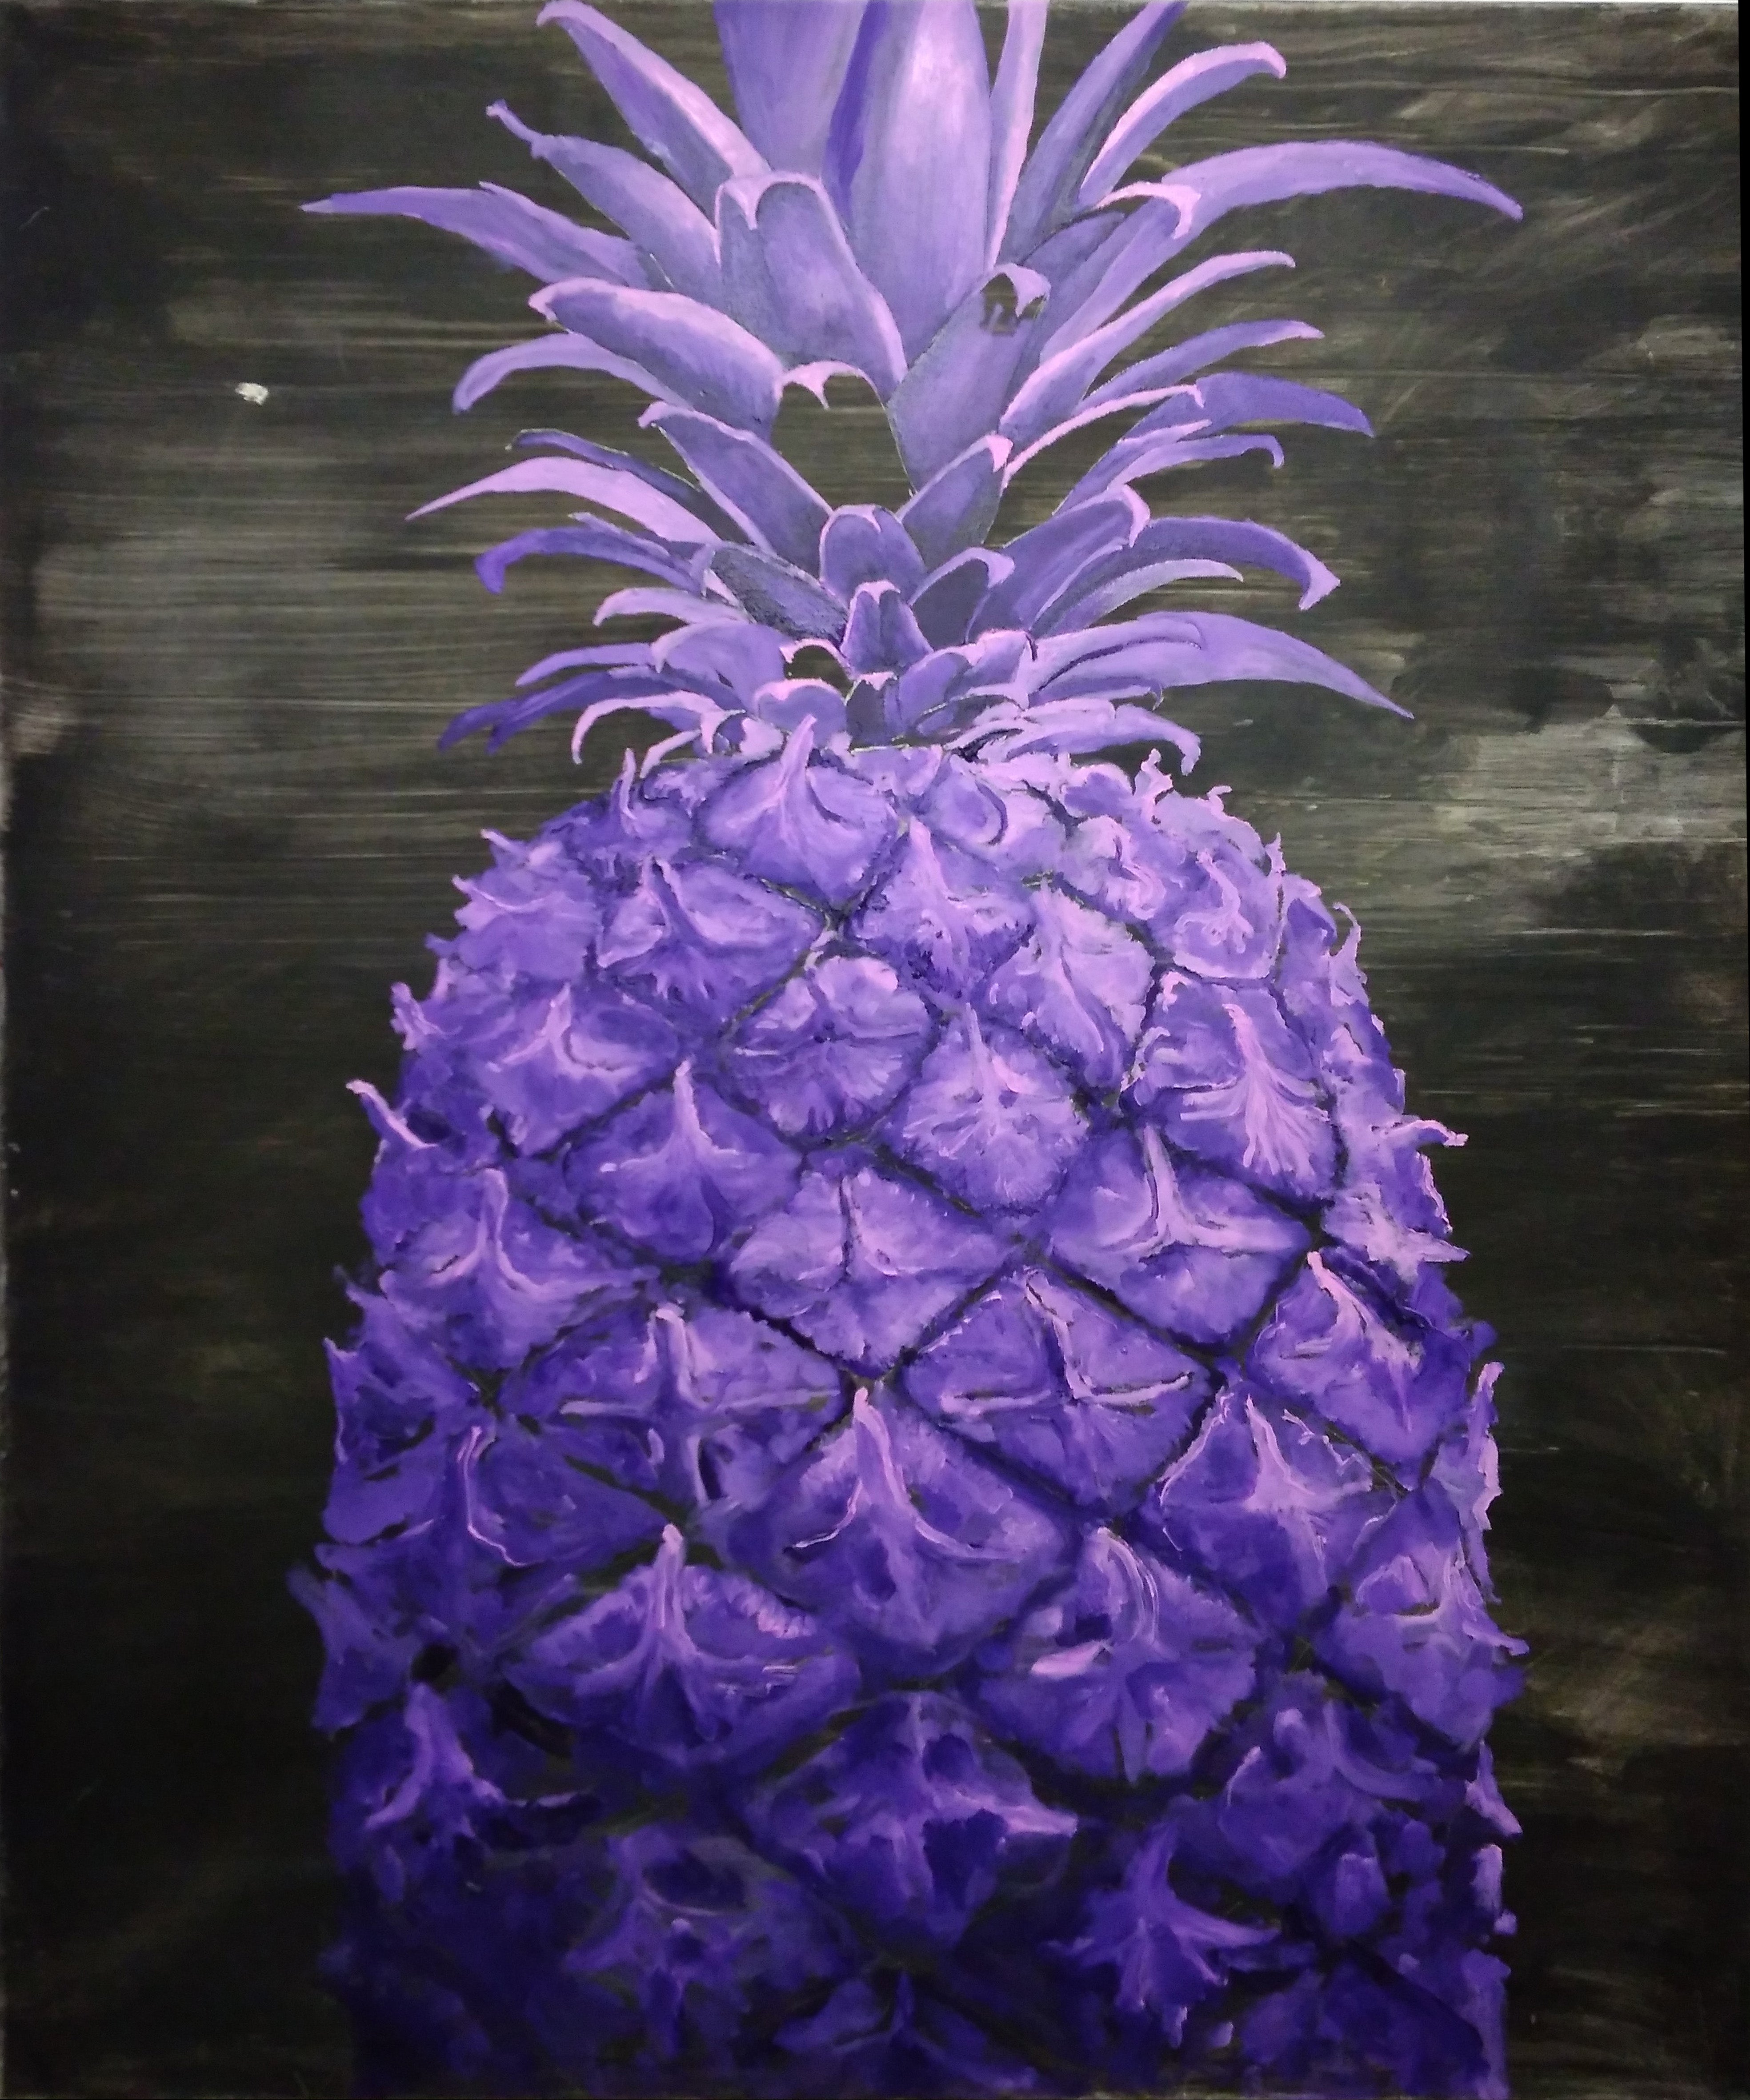 King of all Fruits - Purple Heart